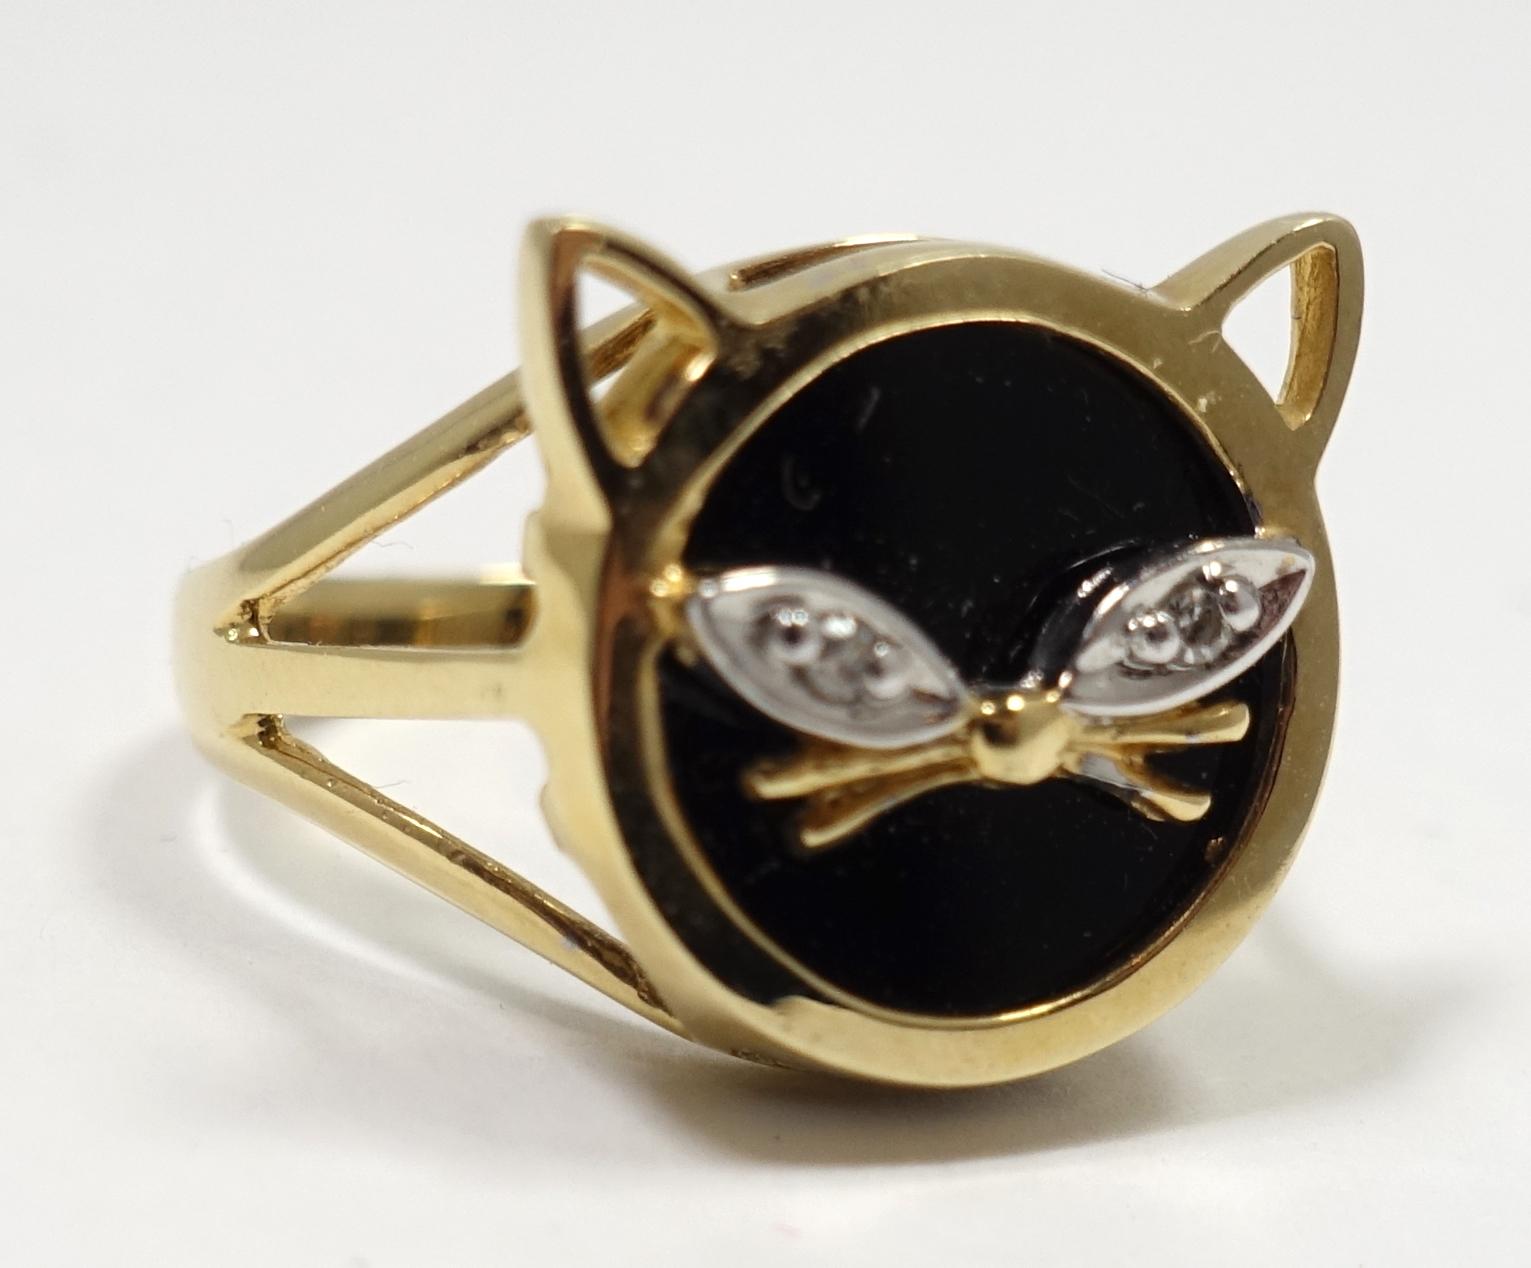 This ring features a cat face design in black onyx with diamond eye accents in a 14kt gold setting, This ring is a size 6.25 and measures 5/8” across the top.  It is in excellent condition.